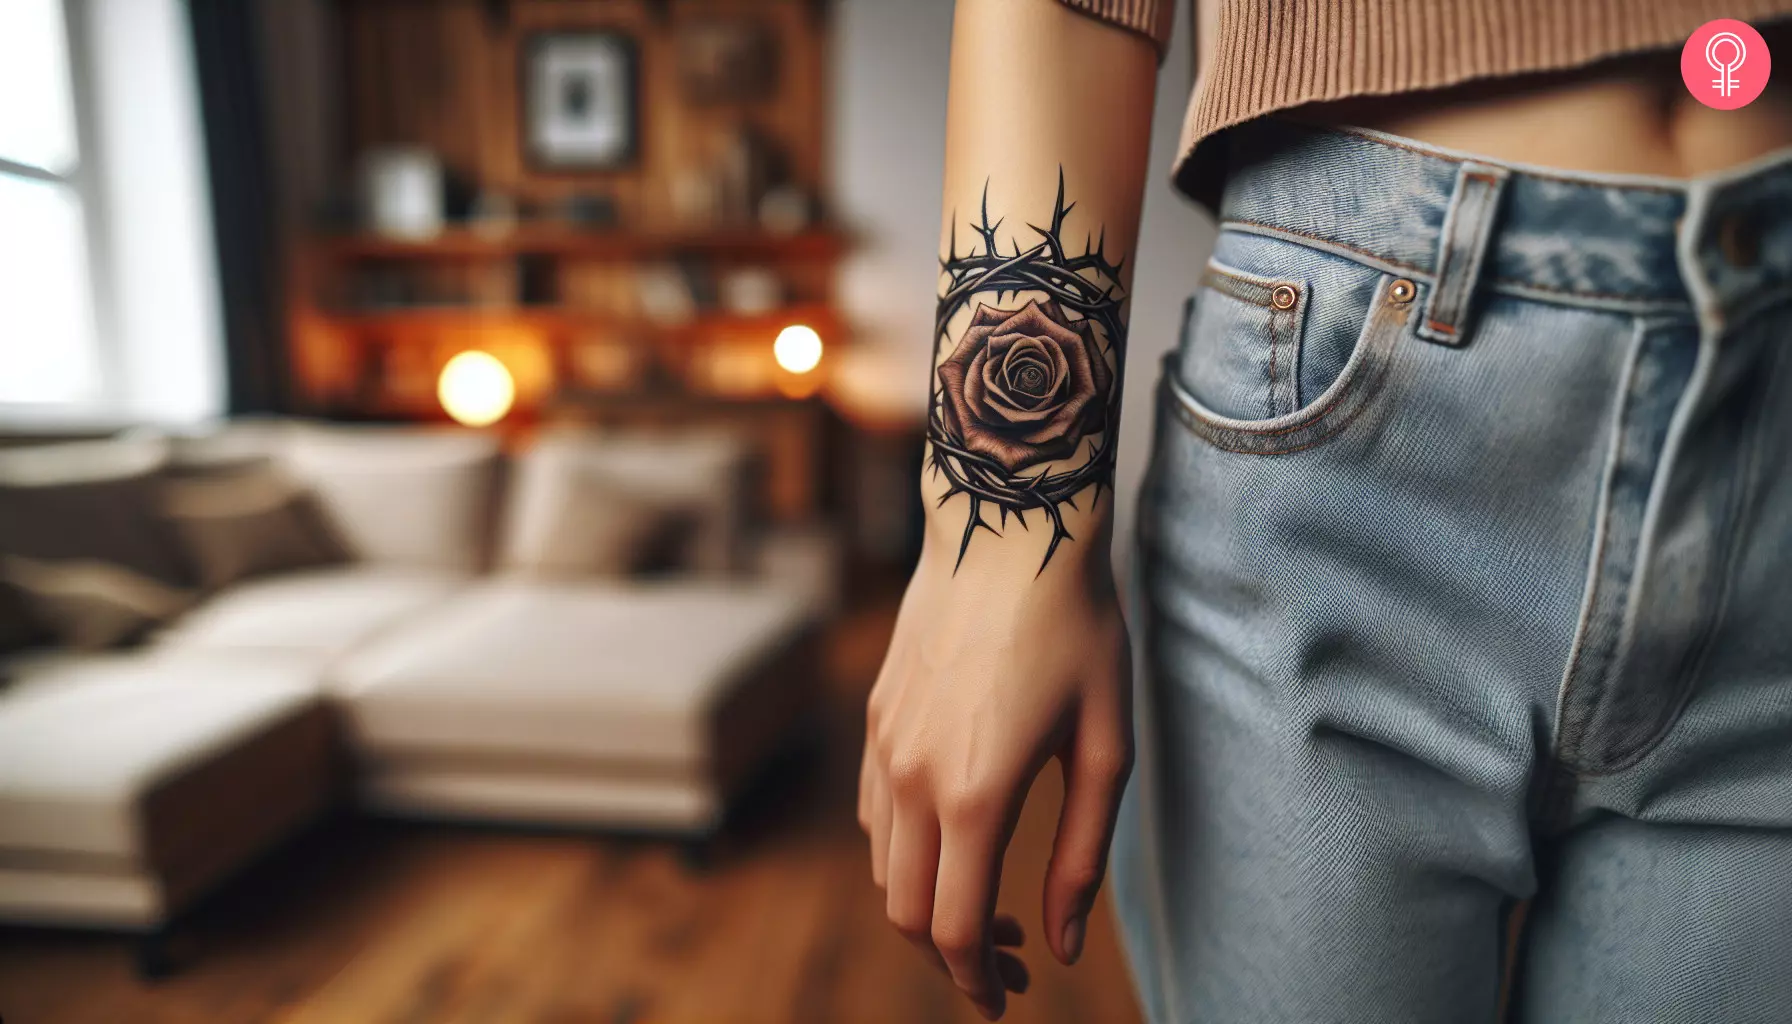 A rose with thorns tattoo design on the wrist